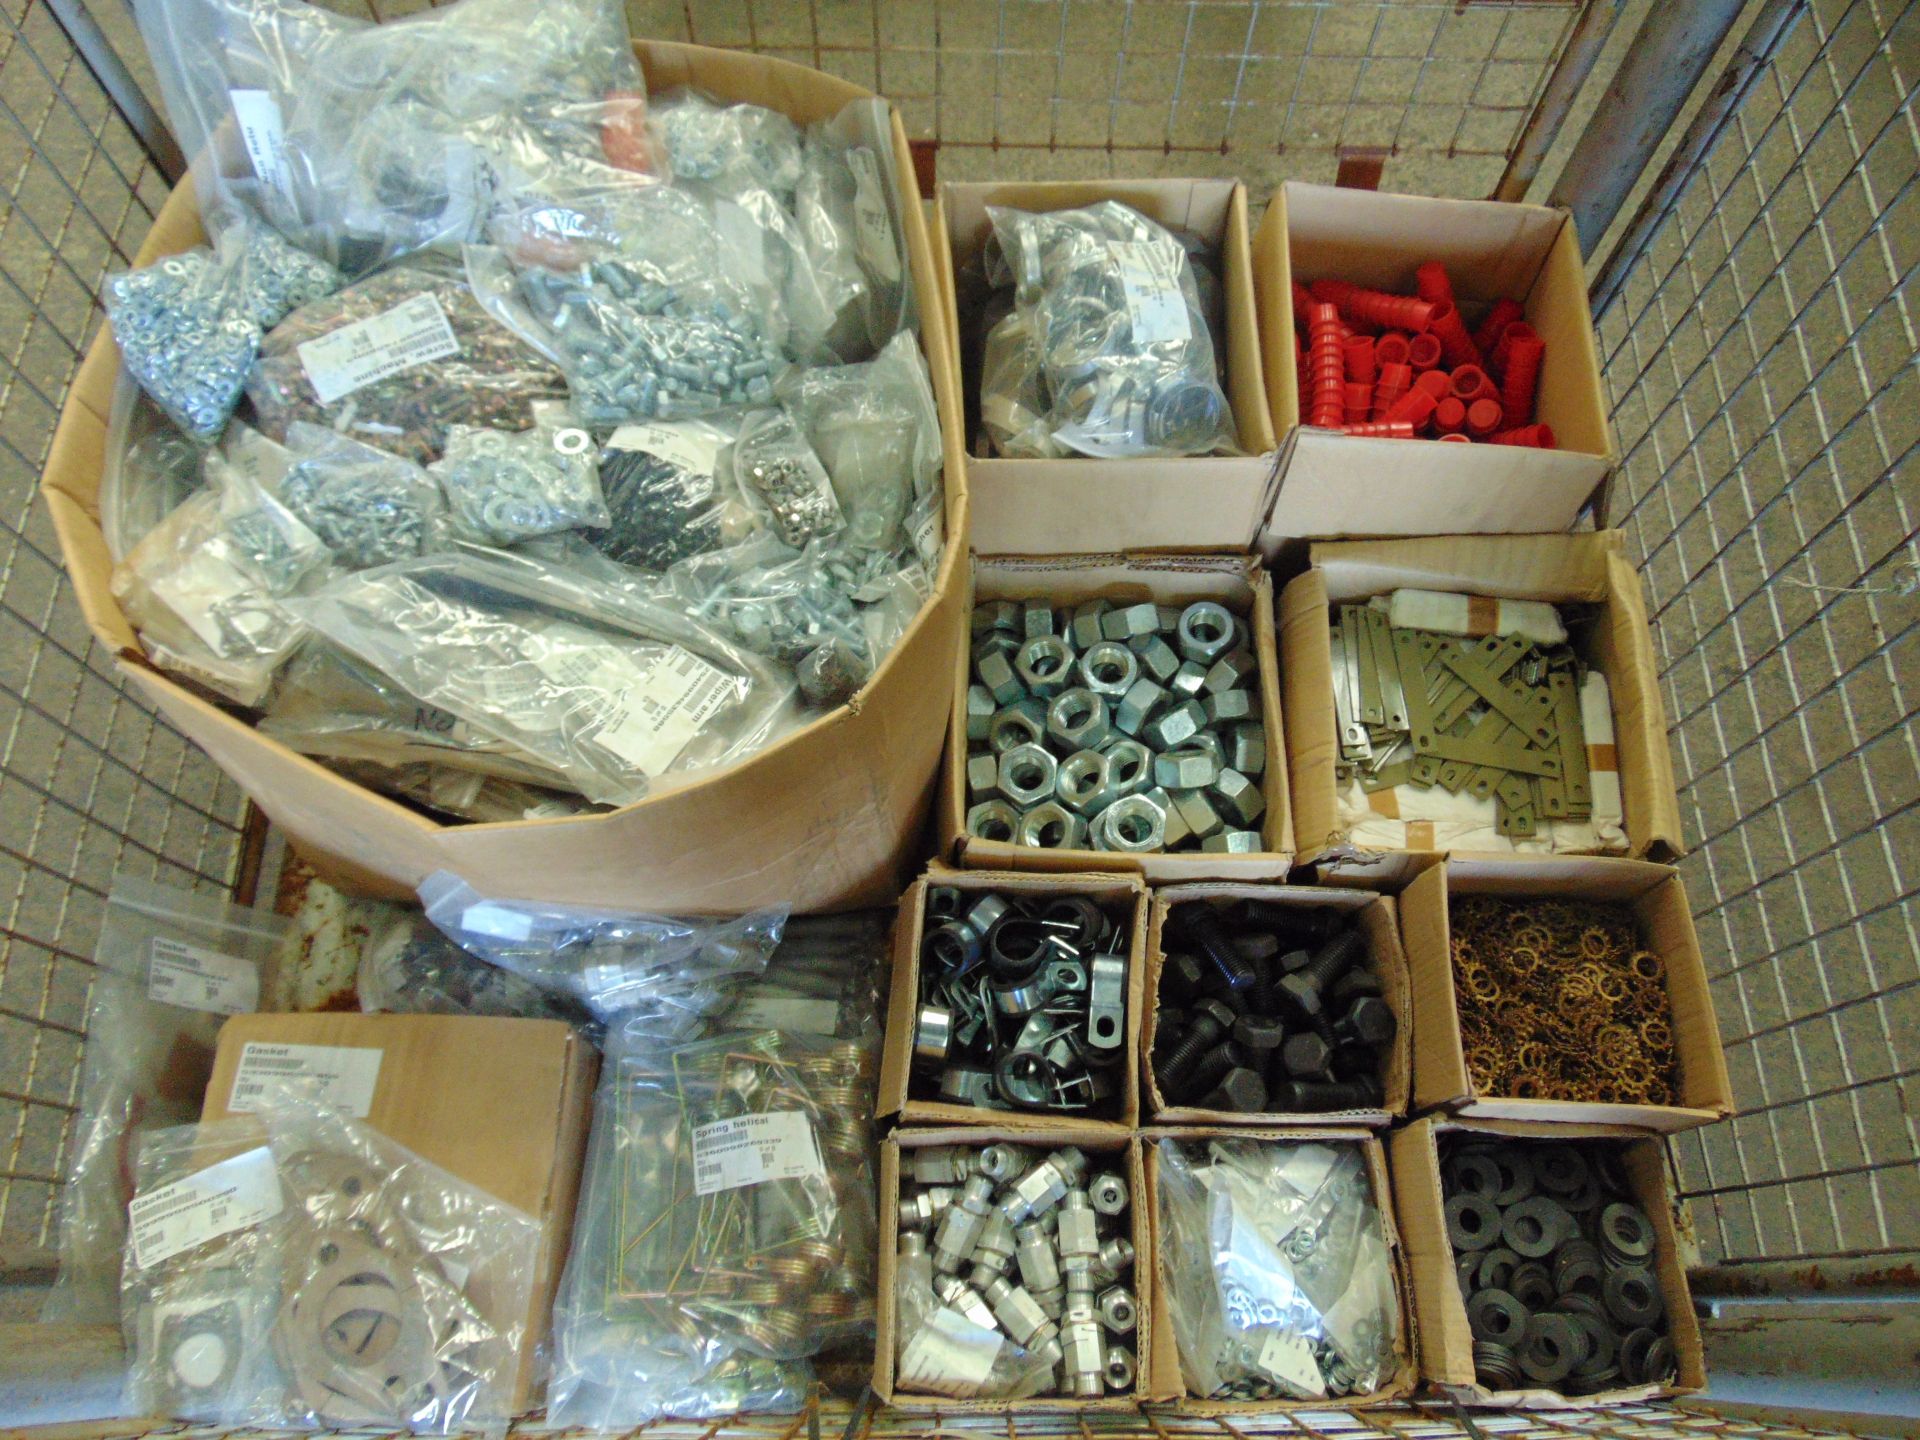 Mixed Stillage of Nuts, Bolts, Washers etc